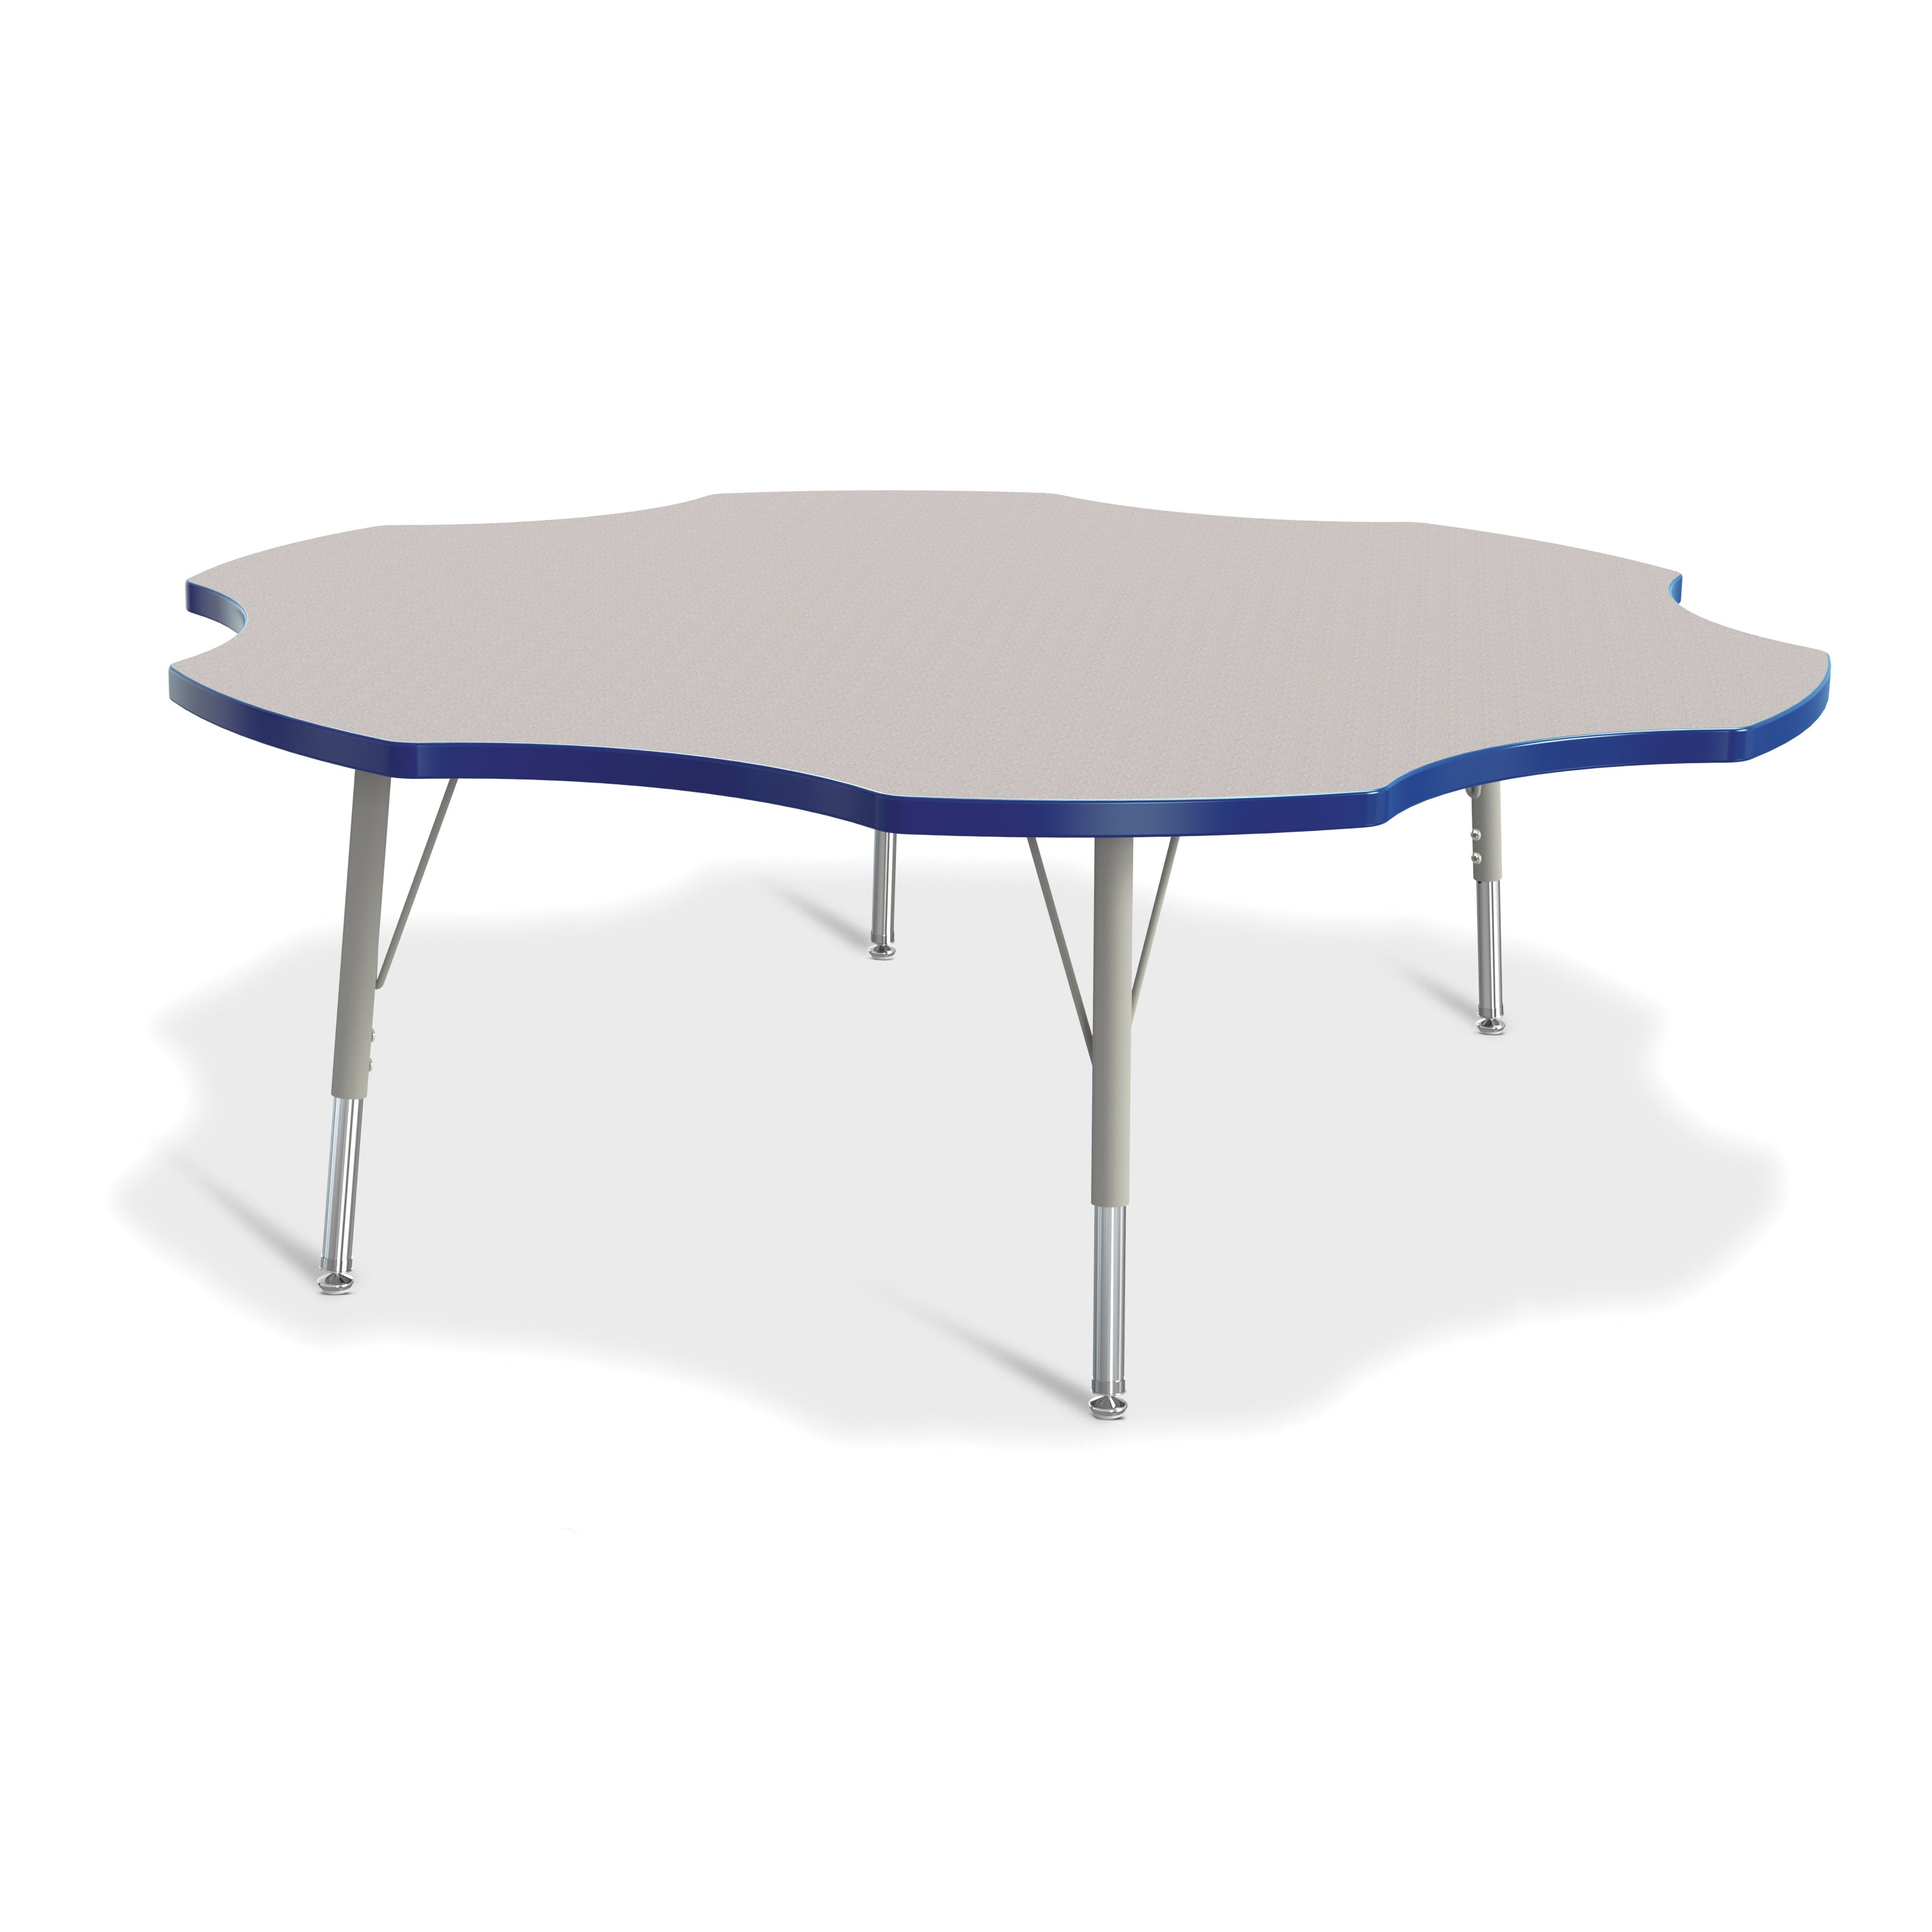 6458JCE003, Berries Six Leaf Activity Table - 60", E-height - Freckled Gray/Blue/Gray